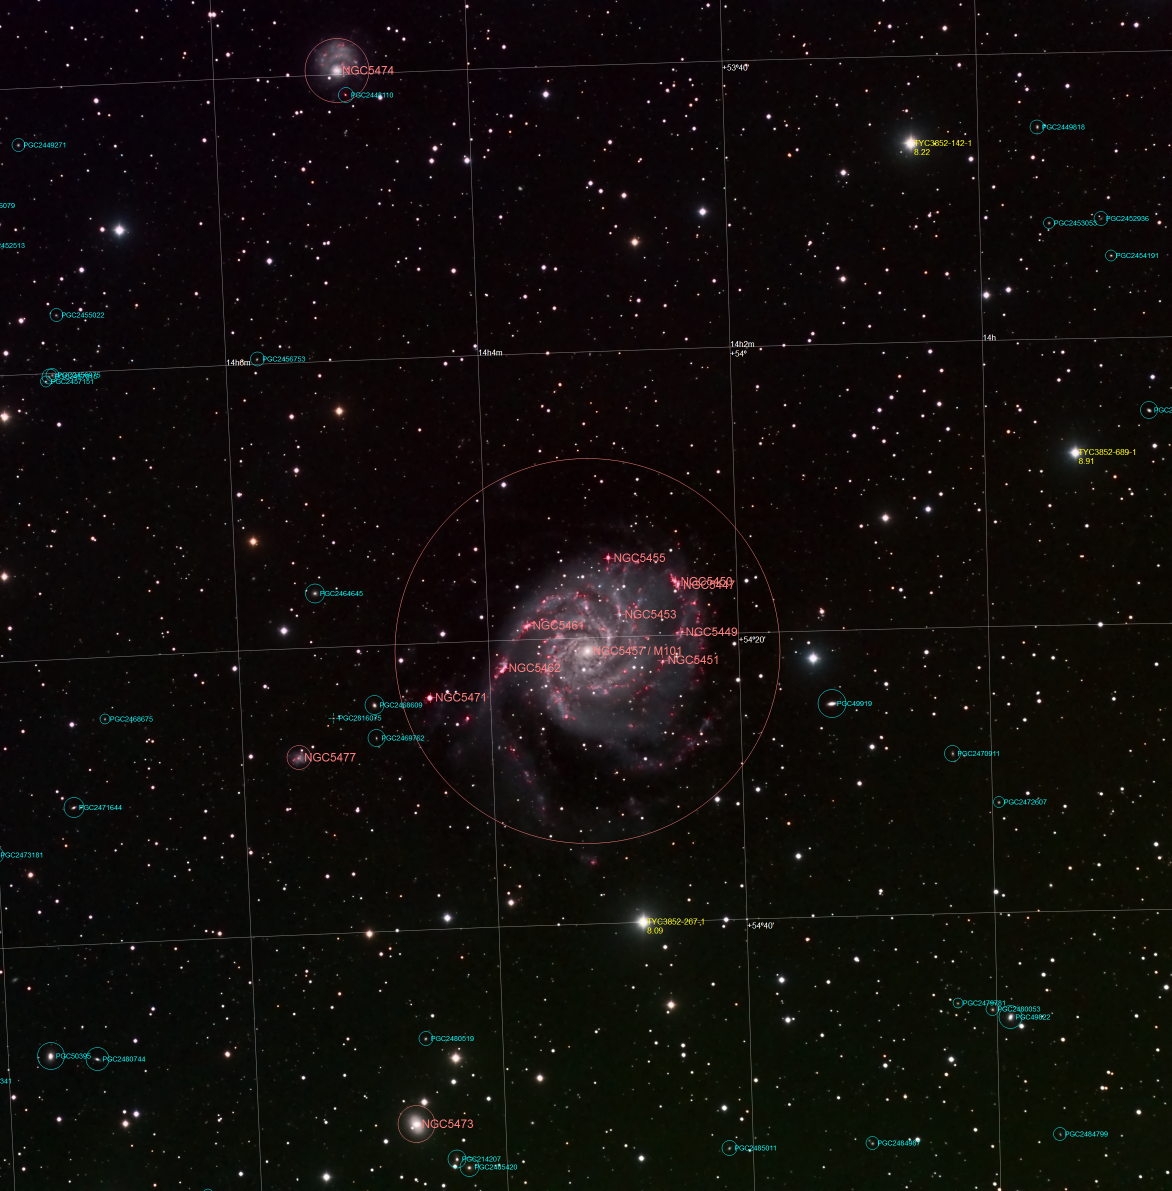 Annotated M101 Image